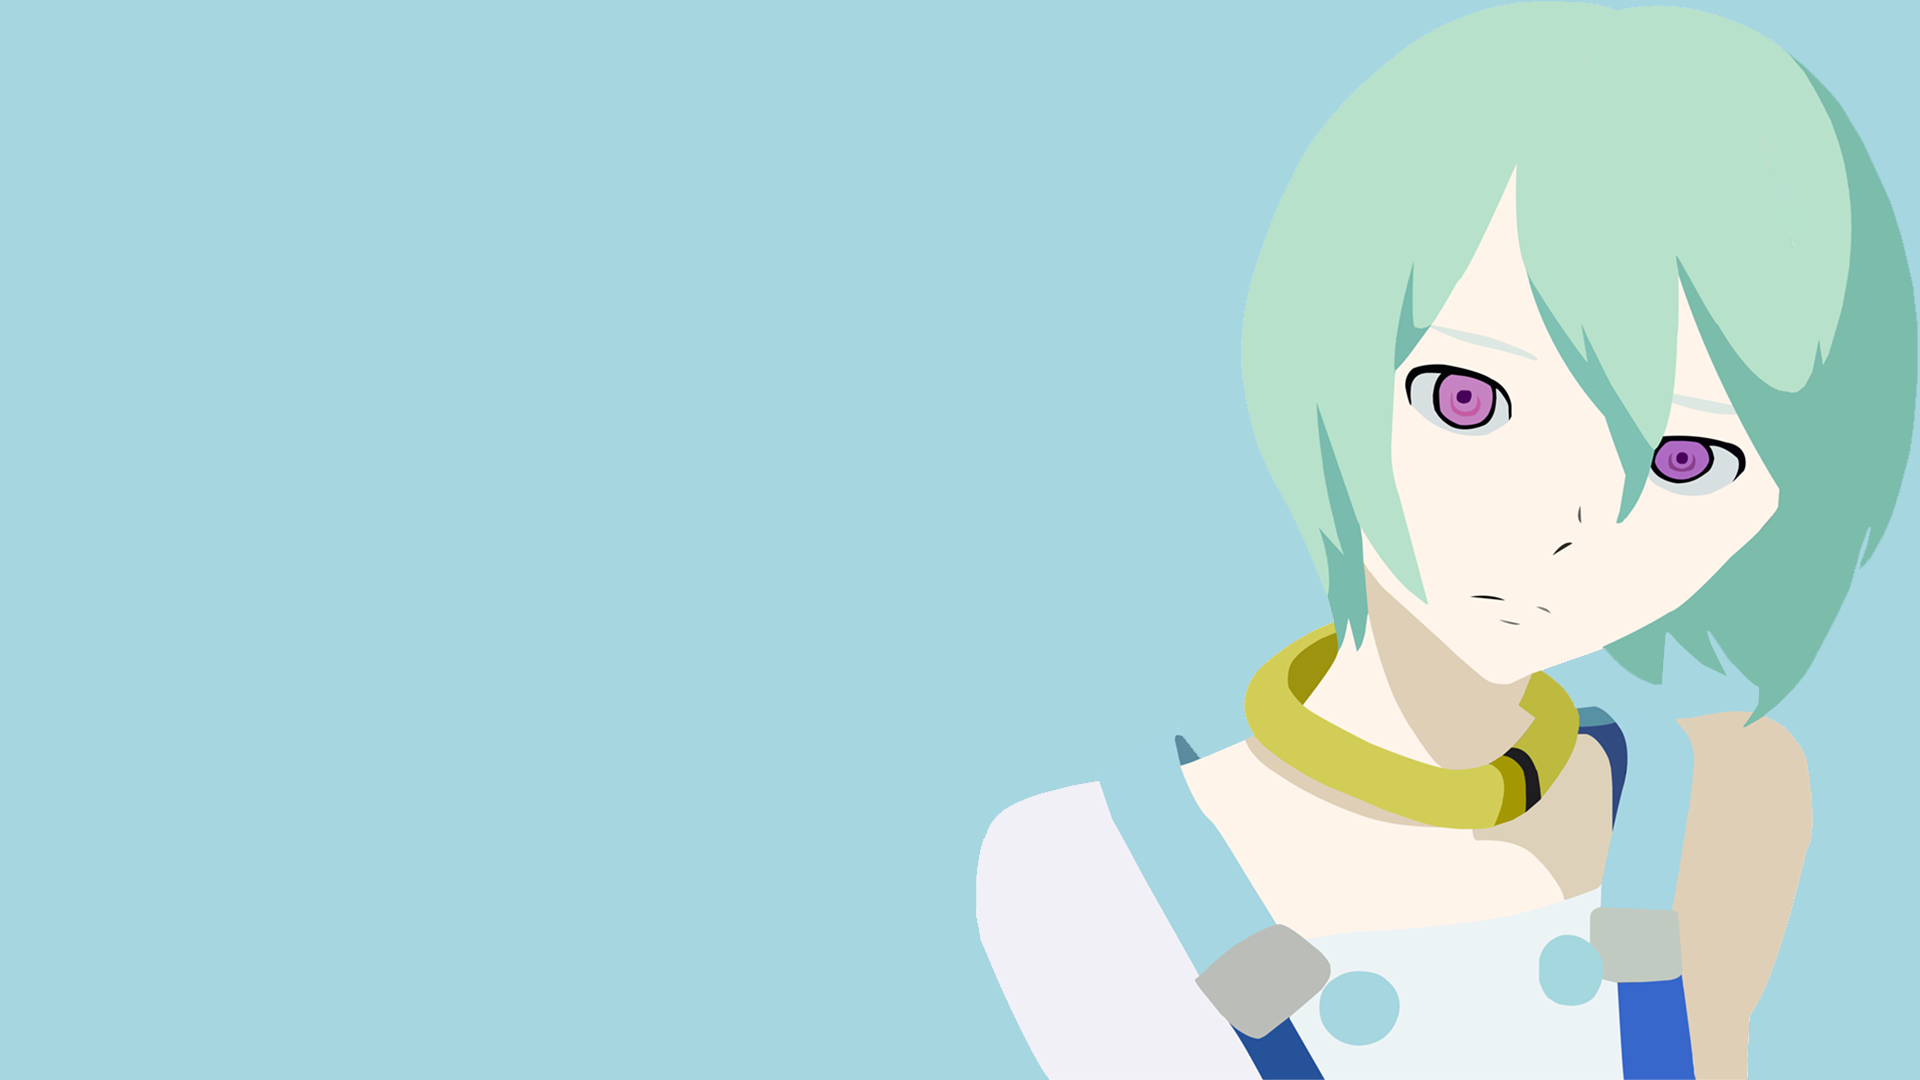 Anyone interested in a Eureka Seven wallpaper that I basically just completed? [1920 x 1080 Hi Res]: anime